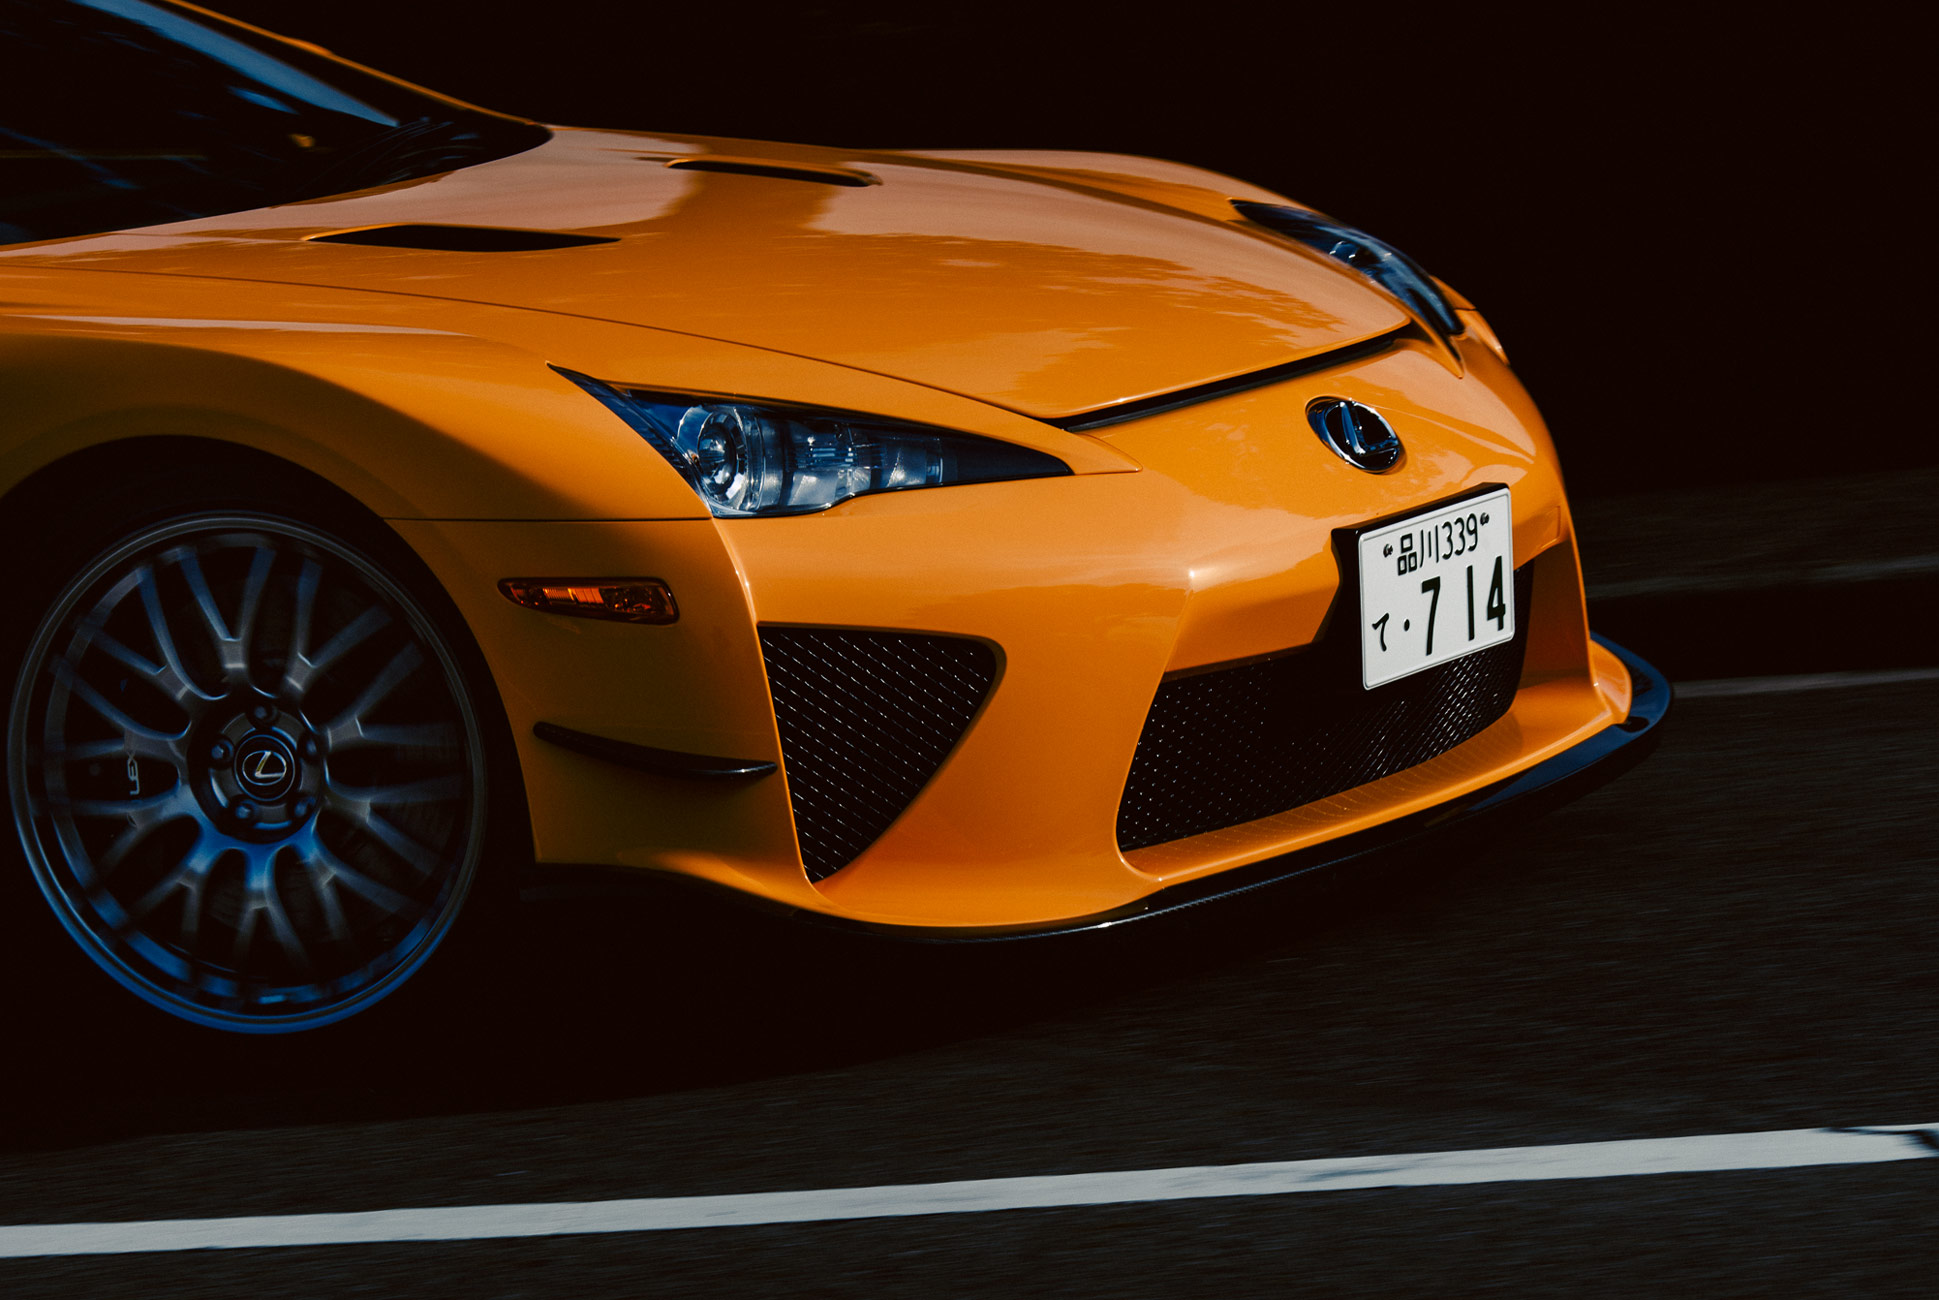 The Nurburgring Edition LFA completed a lap of the famed German circuit in seven minutes and 14 seconds (hence this vehicle’s license plate), the fifth-fastest time for a production vehicle in 2011.